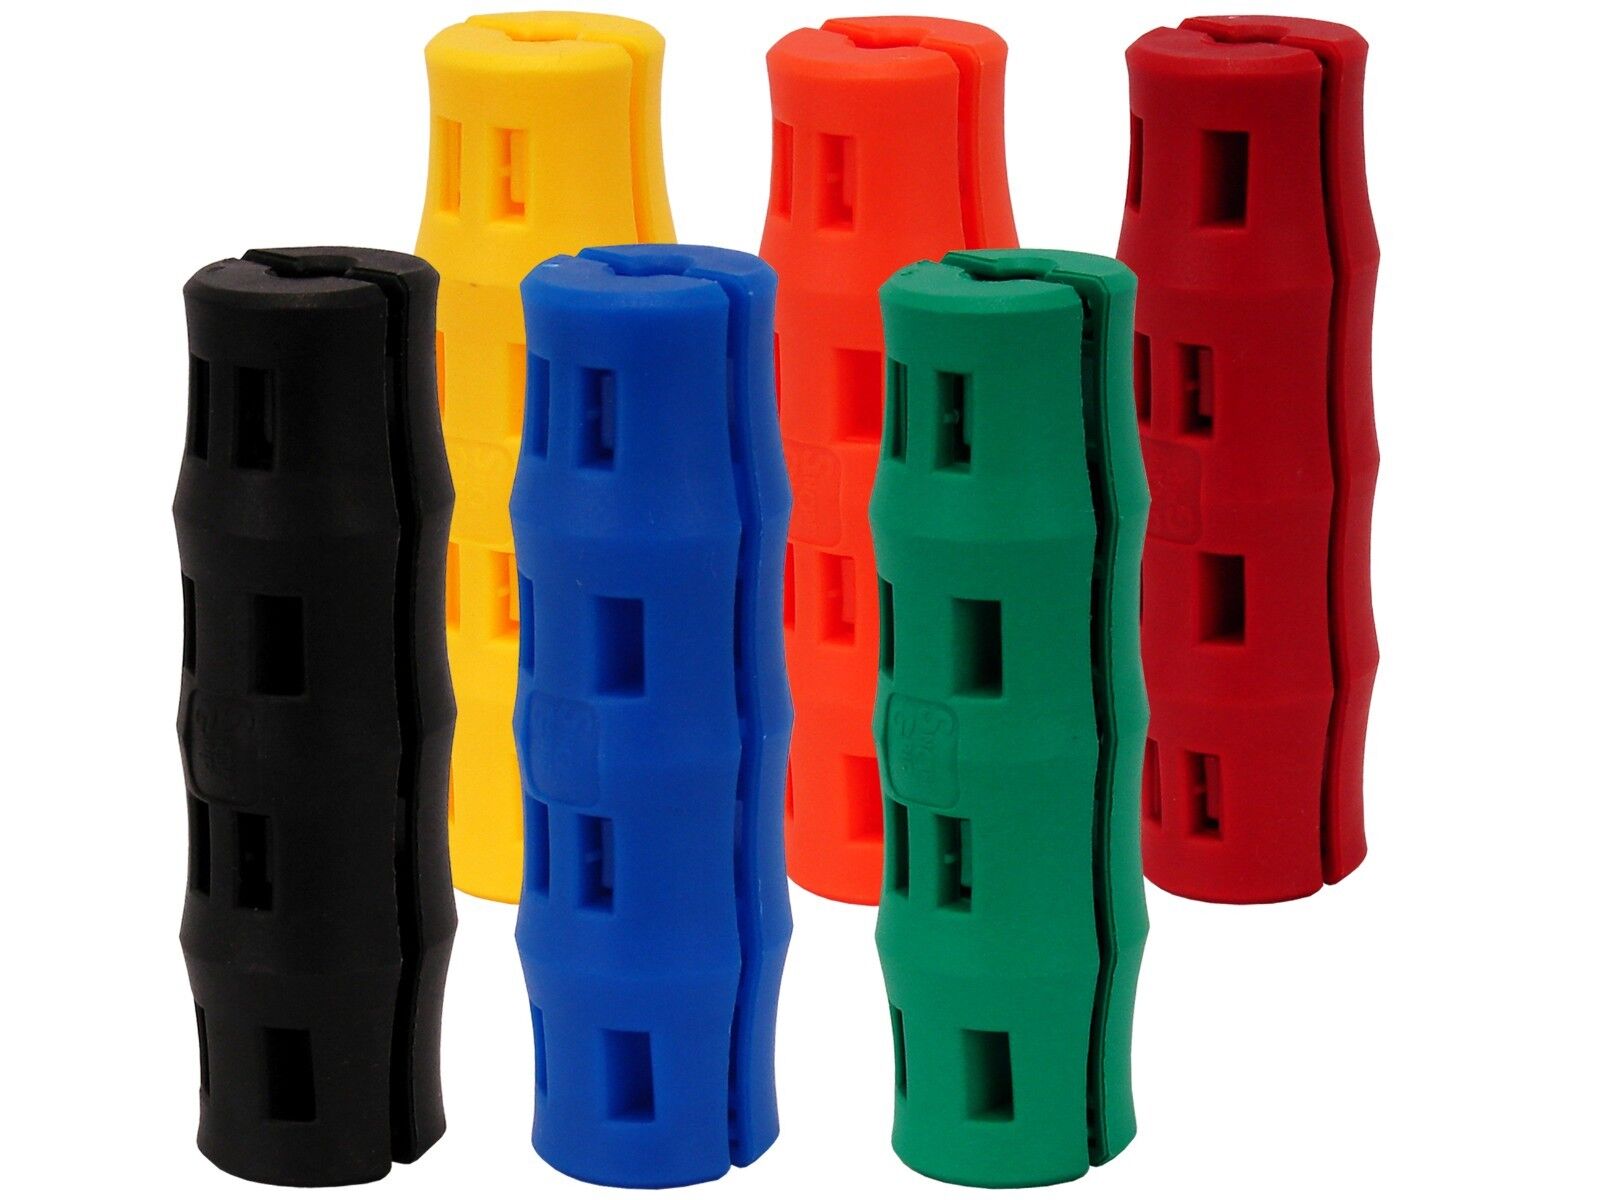 Snappy Grip Replacement Grip, ASSORTED 6 Pack (Shipping Included)